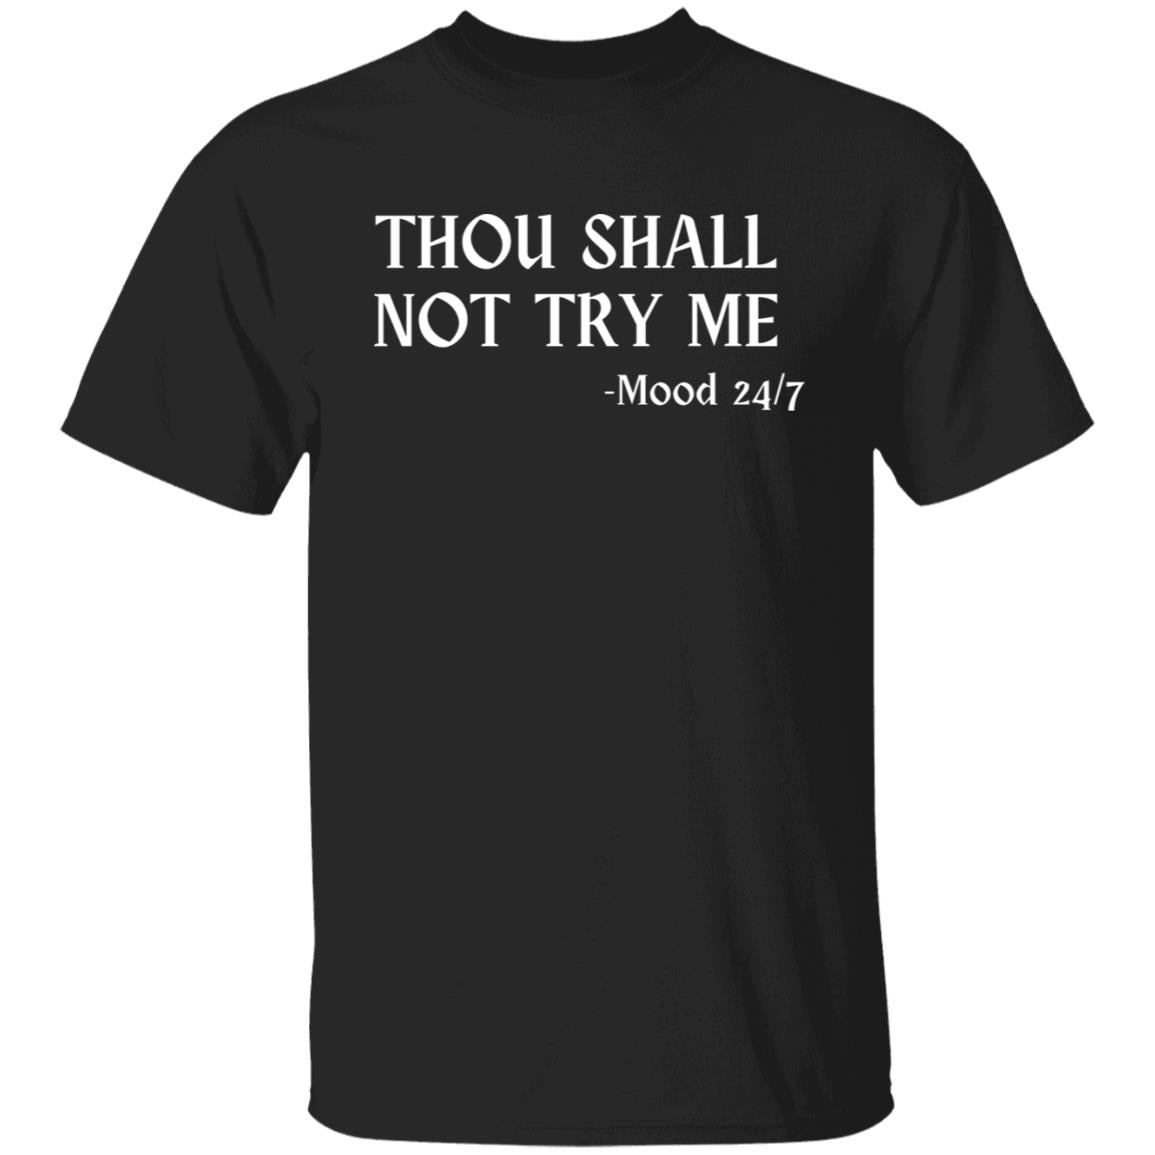 Thou Shall Not Try Me Mood 24/7 Funny Bible Verse Quote Tee T-Shirt